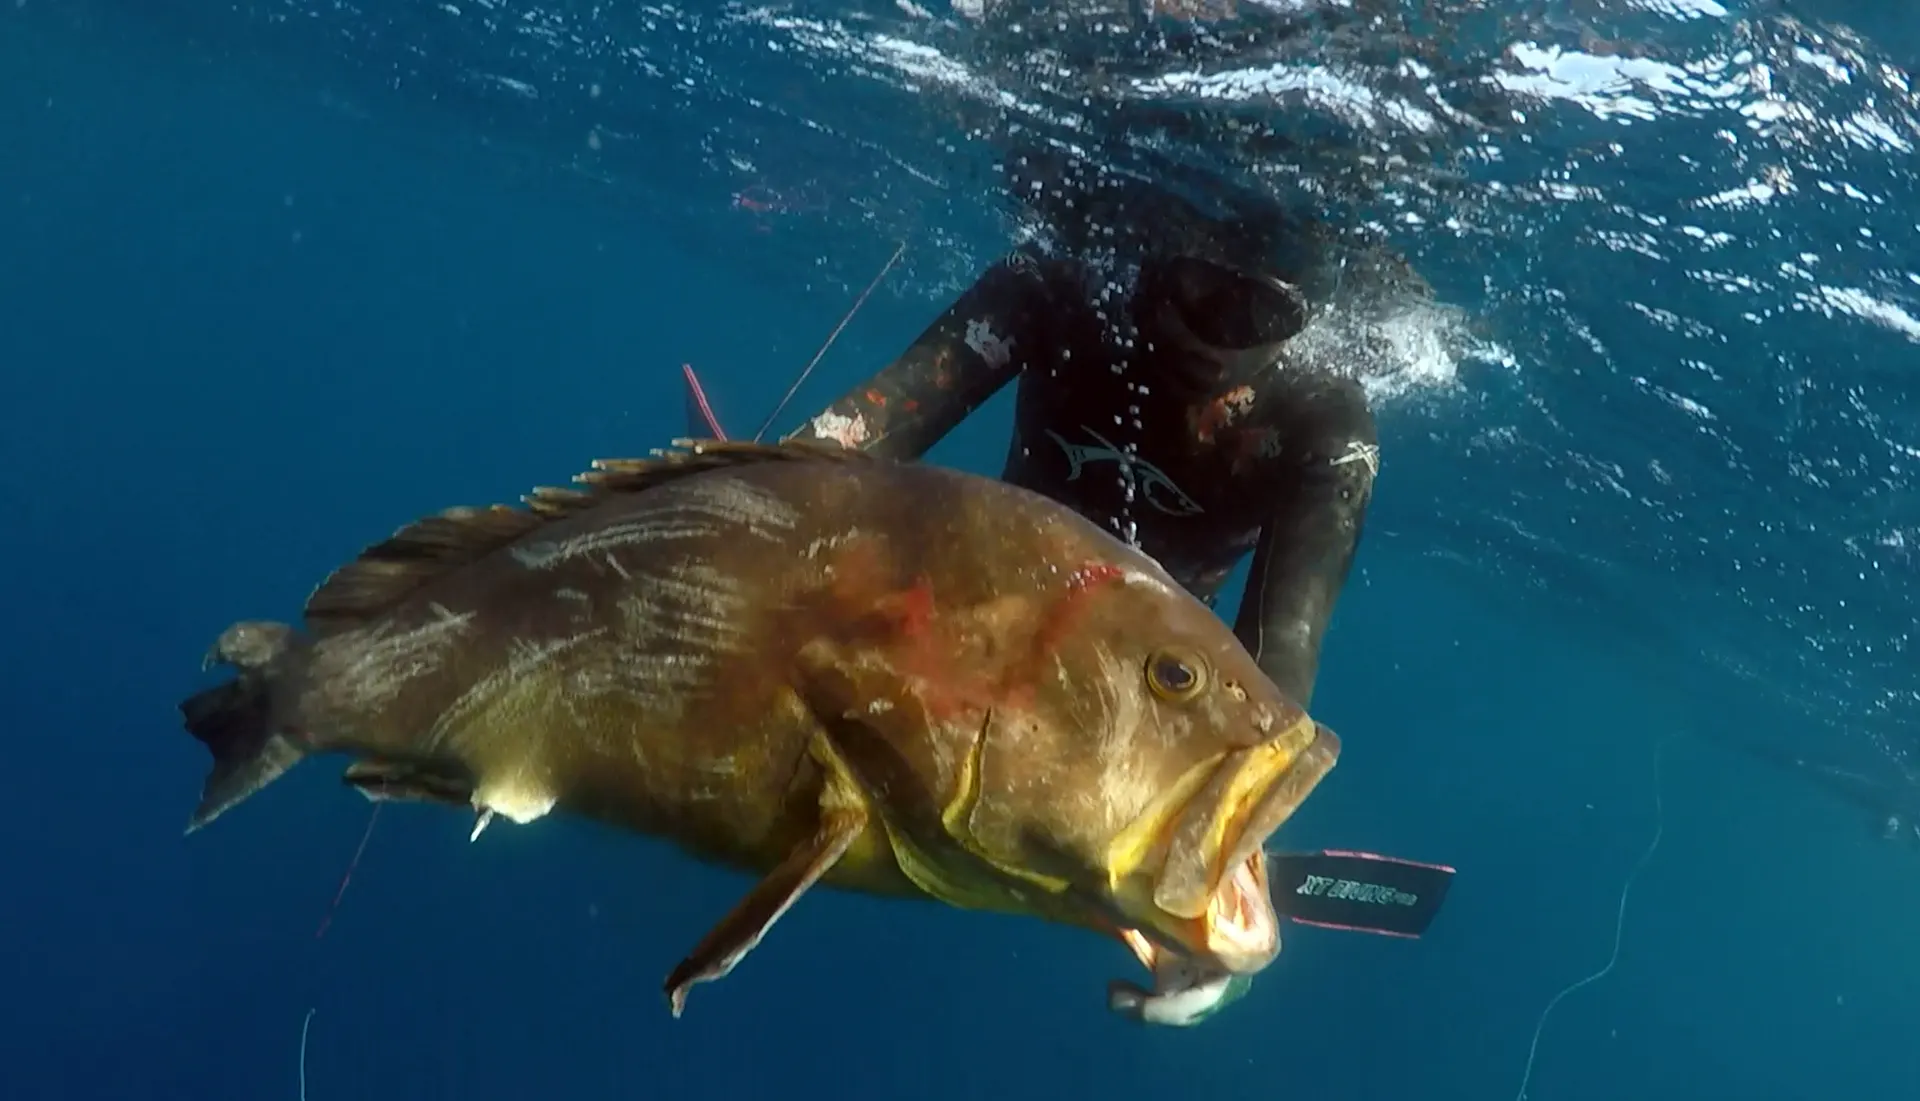 https://www.cmas.org/images/2023/03/22/spearfishing_everview.webp